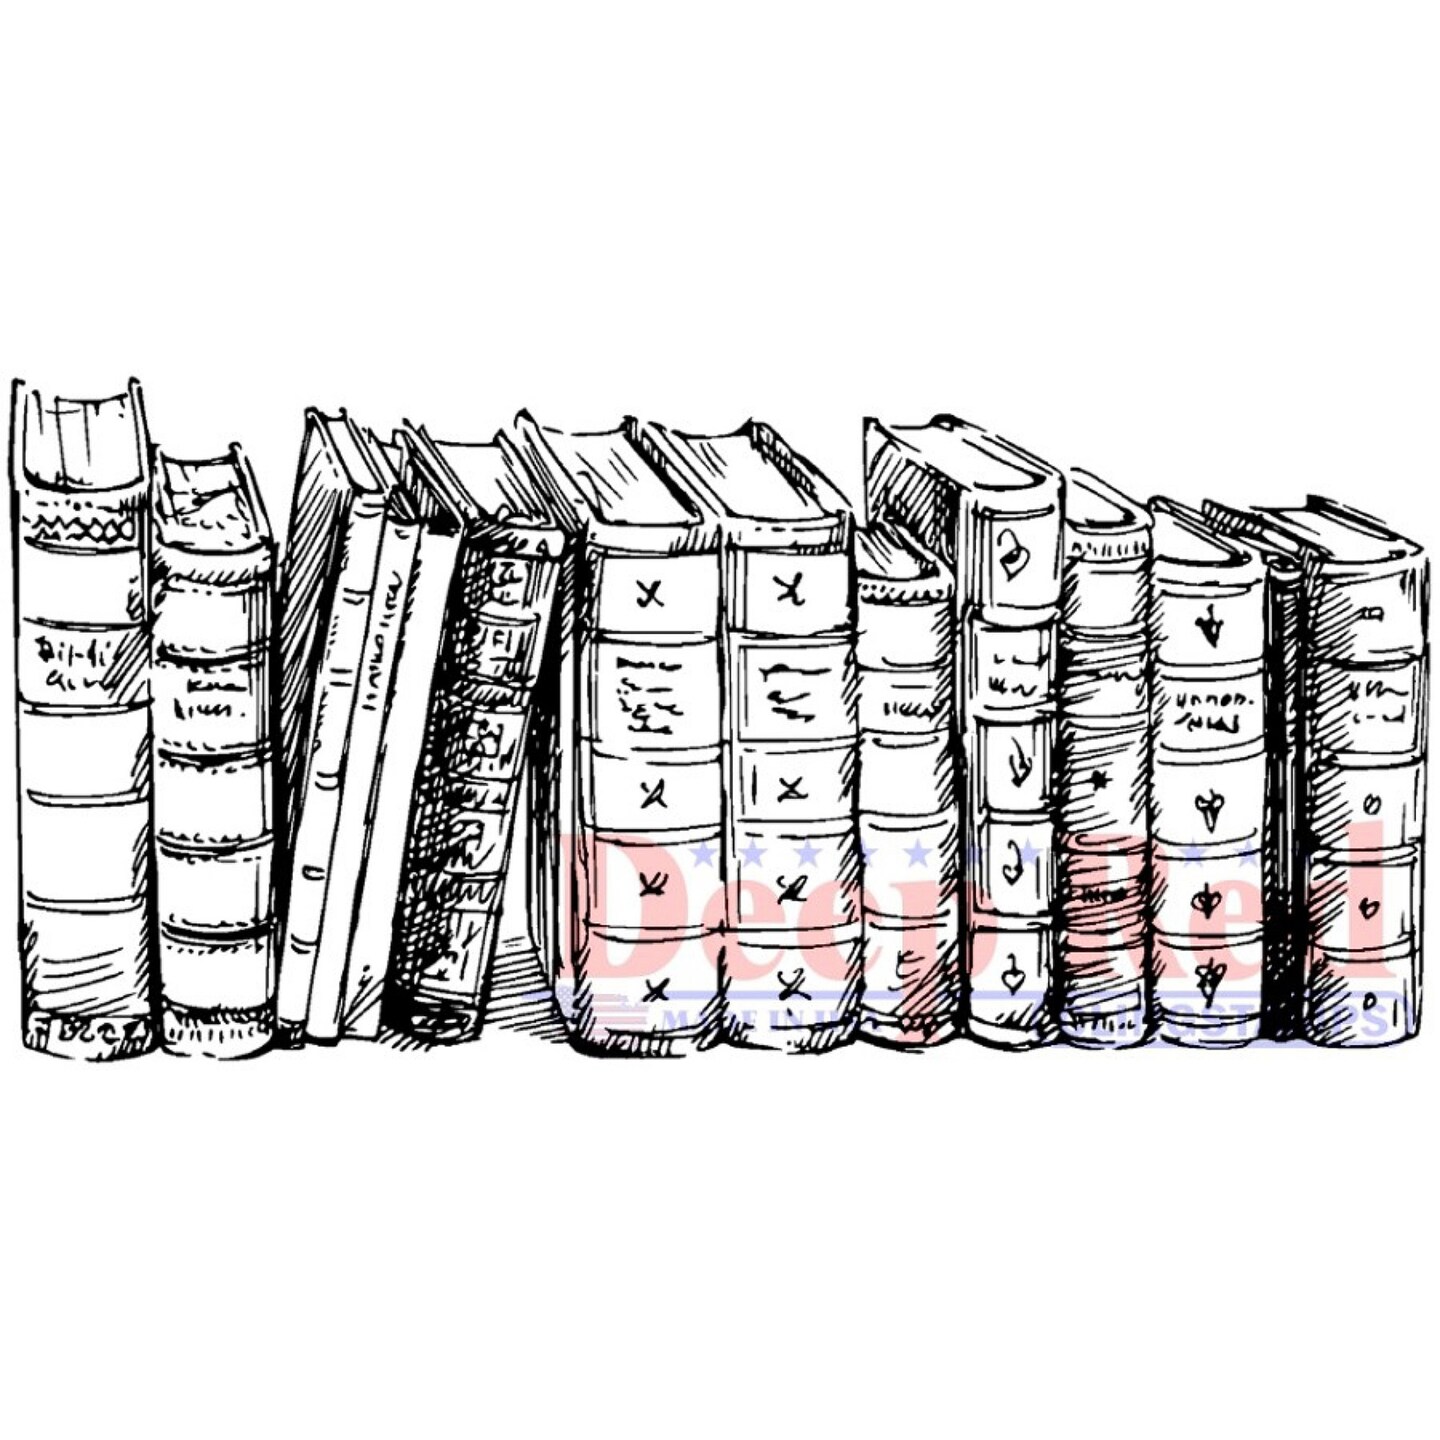 Deep Red Stamps Old Books Border Rubber Cling Stamp 3.2 x 1.5 inches